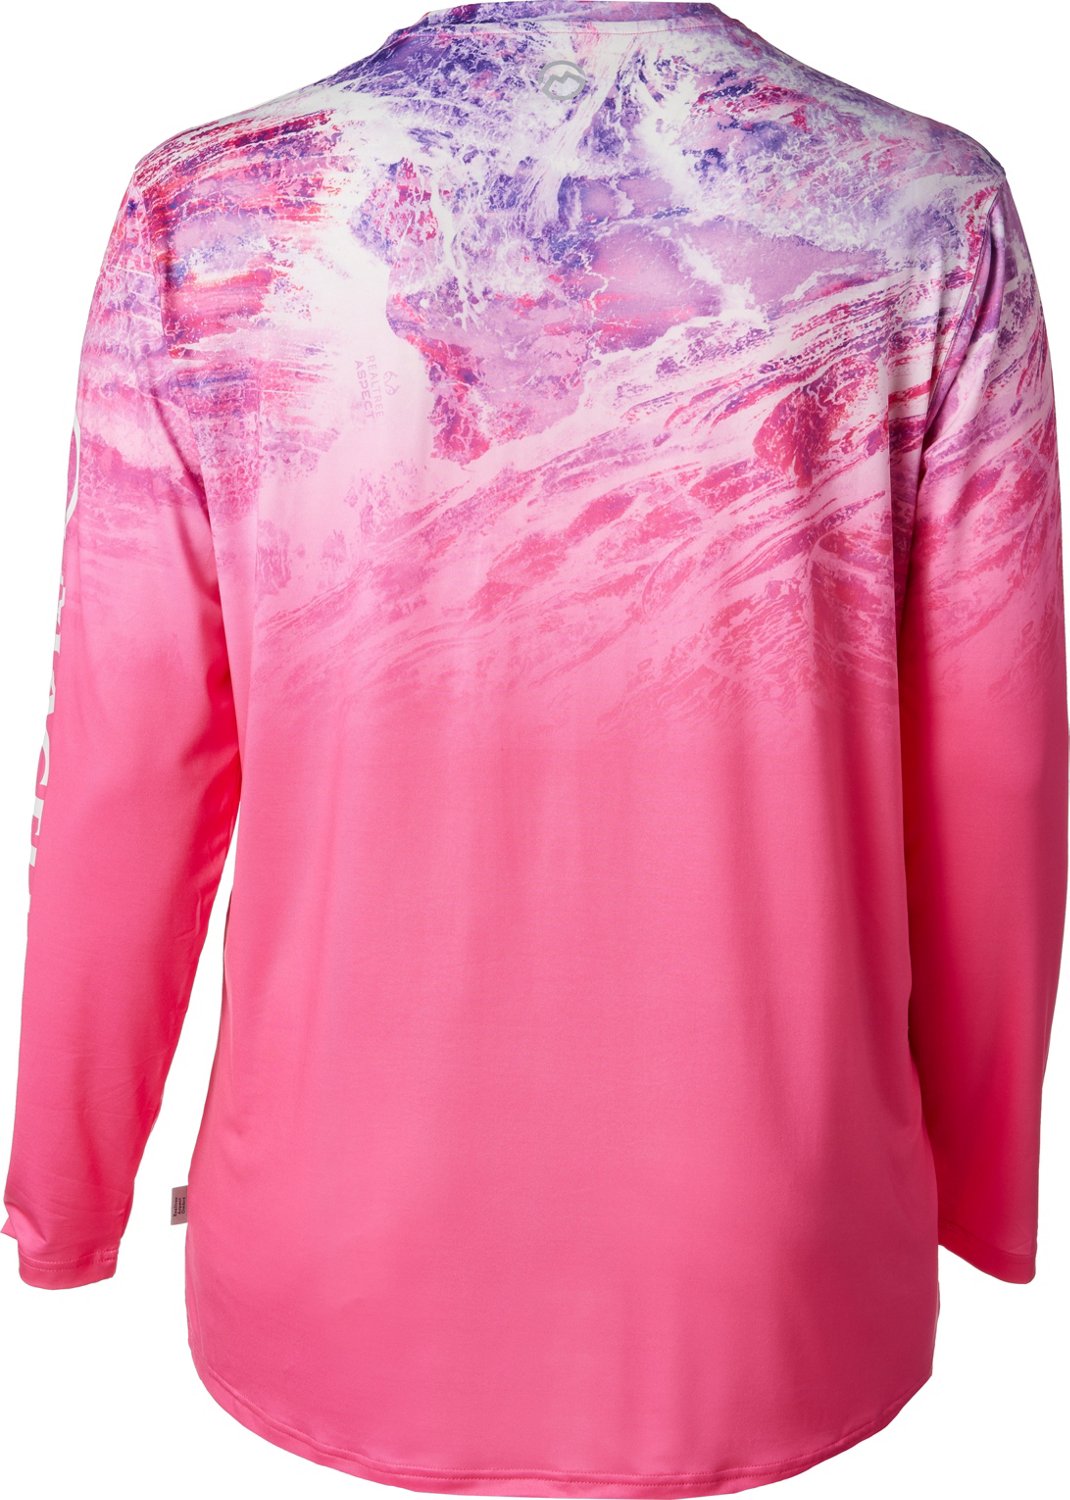 Magellan Outdoors Women's Realtree Aspect Ombre Plus Size Long Sleeve Top